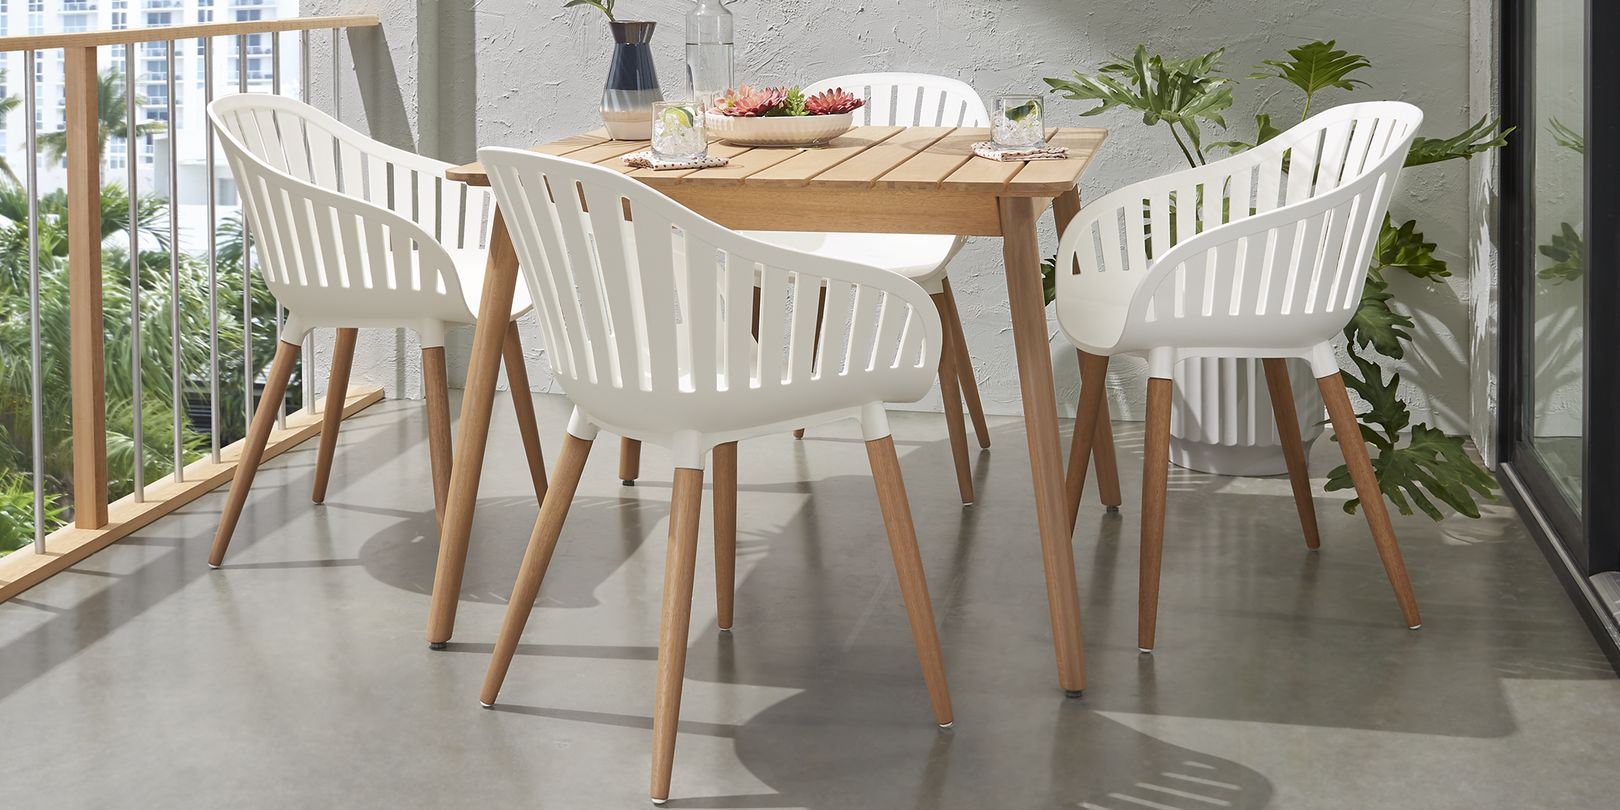 Square outdoor dining set